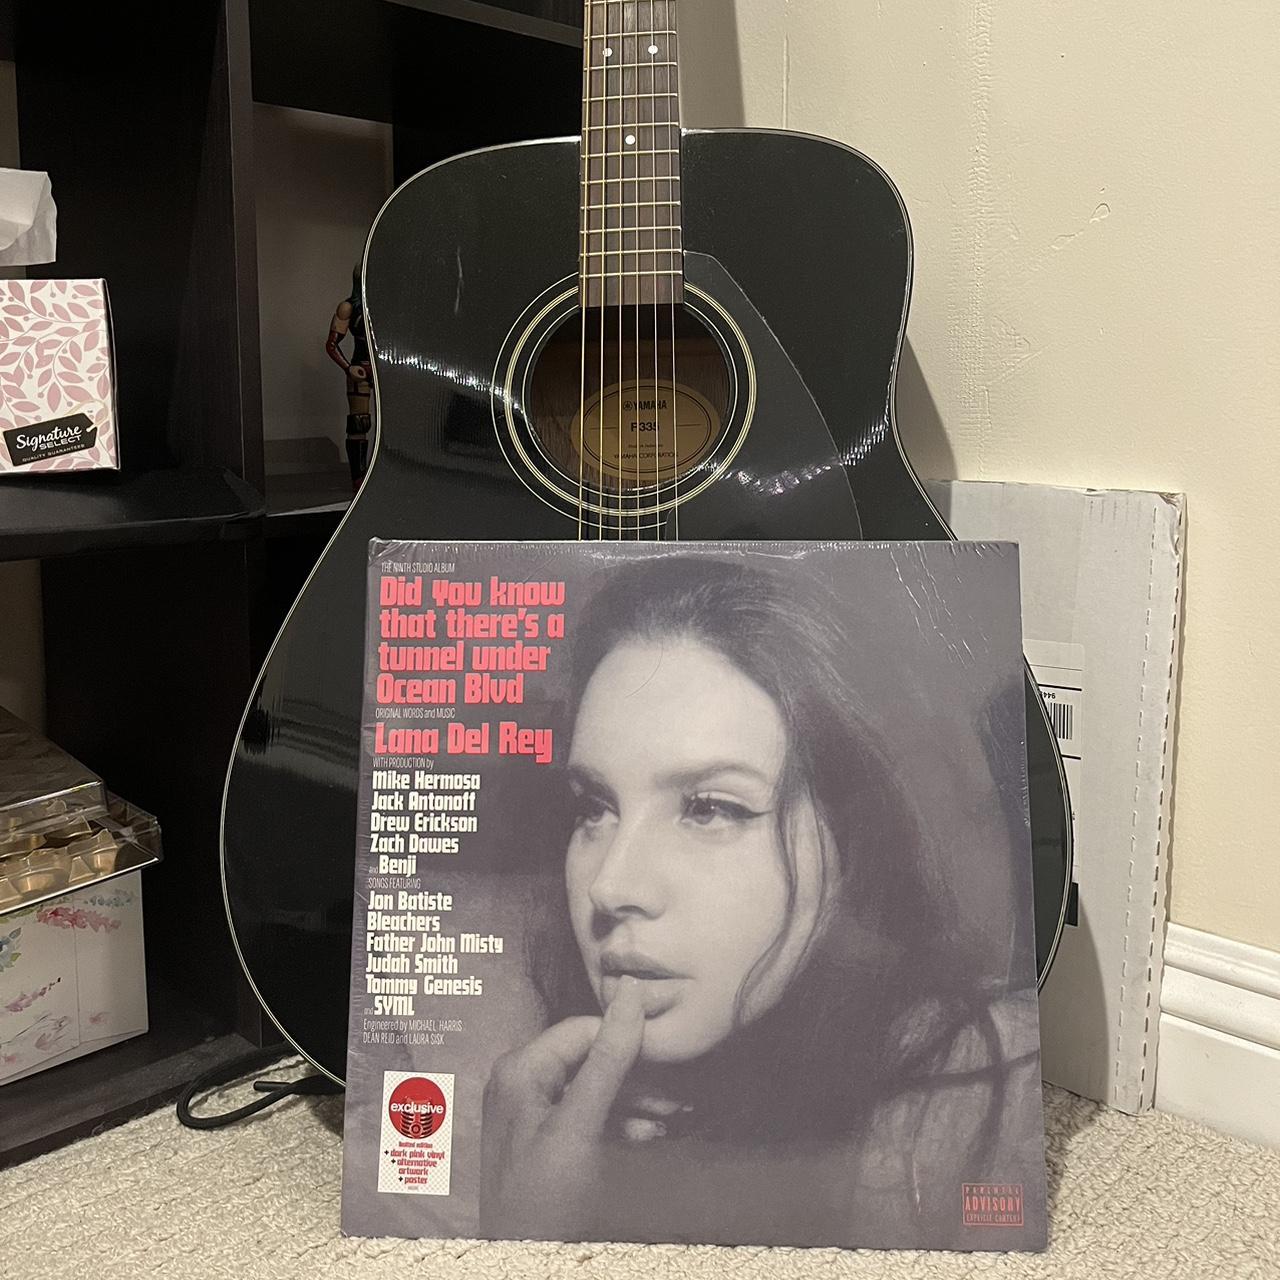 Lana Del Rey - “Did you know that there’s a tunnel under Ocean Blvd”  (Target Exclusive, CD)